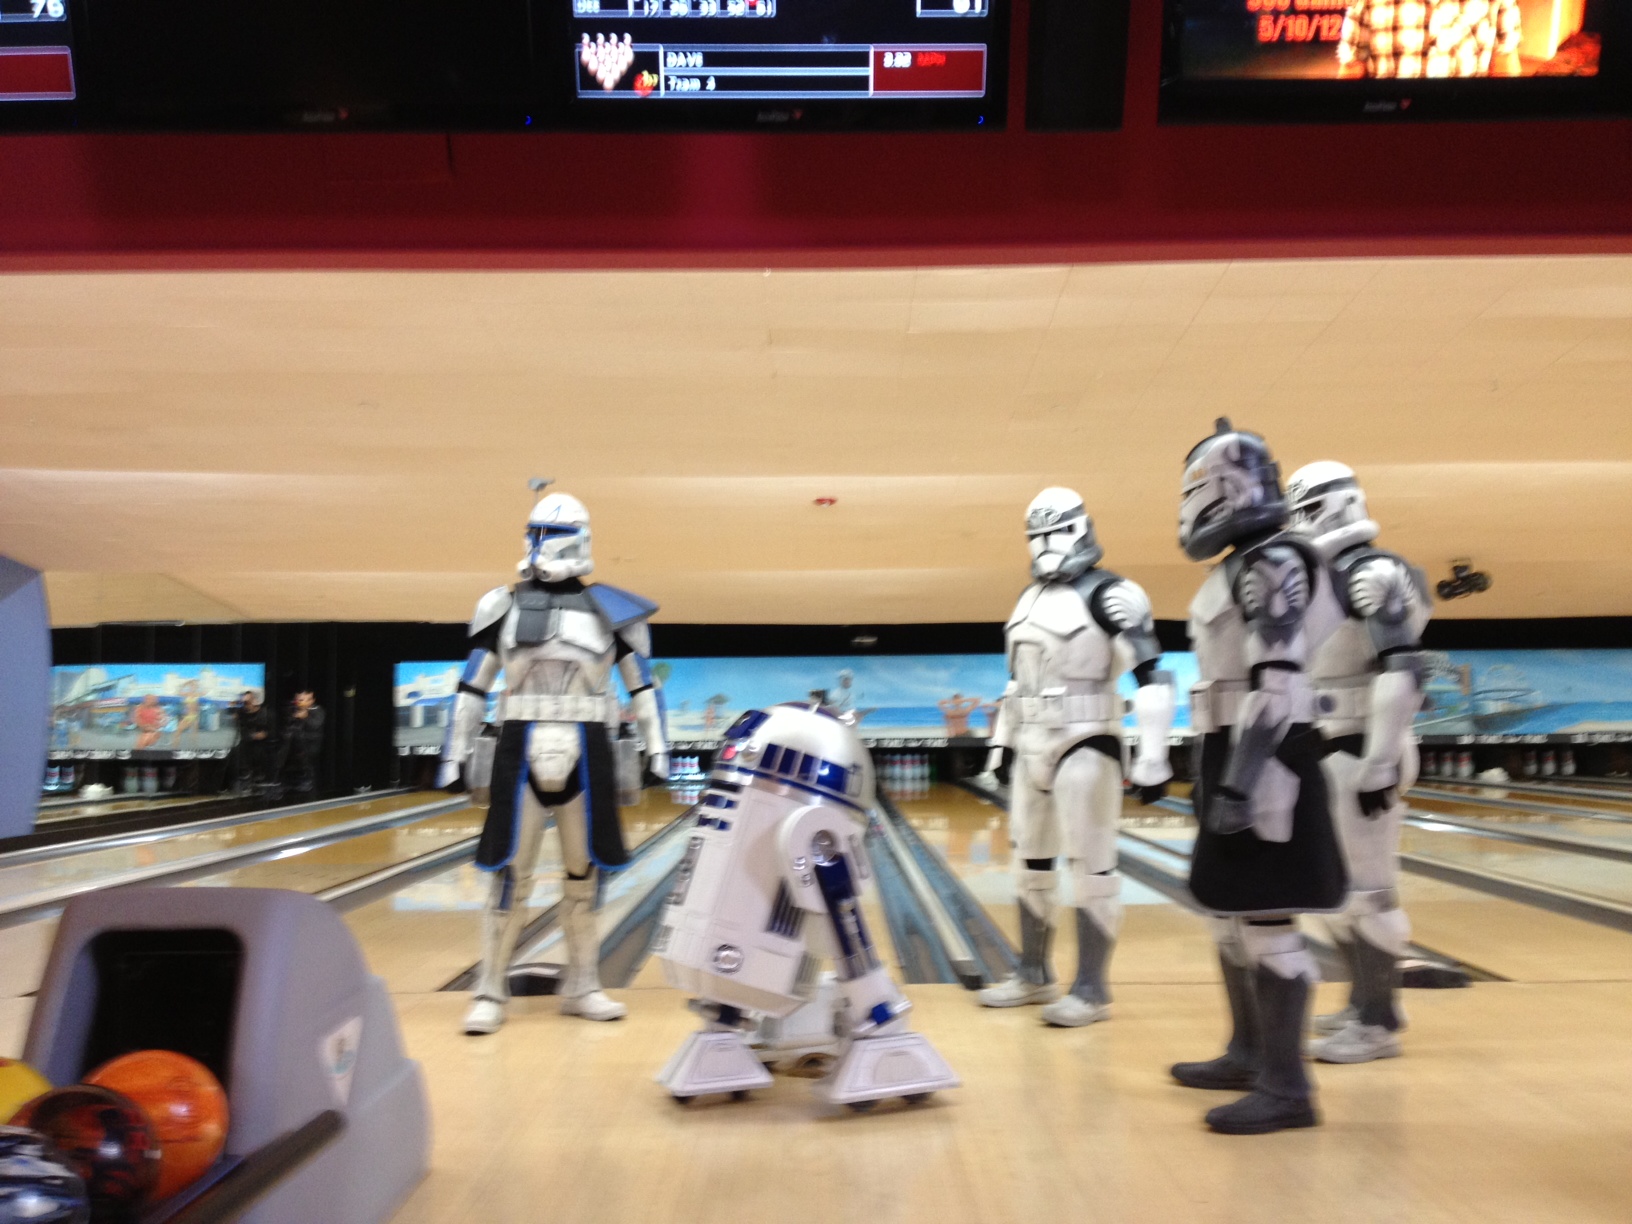 Thank you to the 501st Legion and R2-D2 for helping us out!